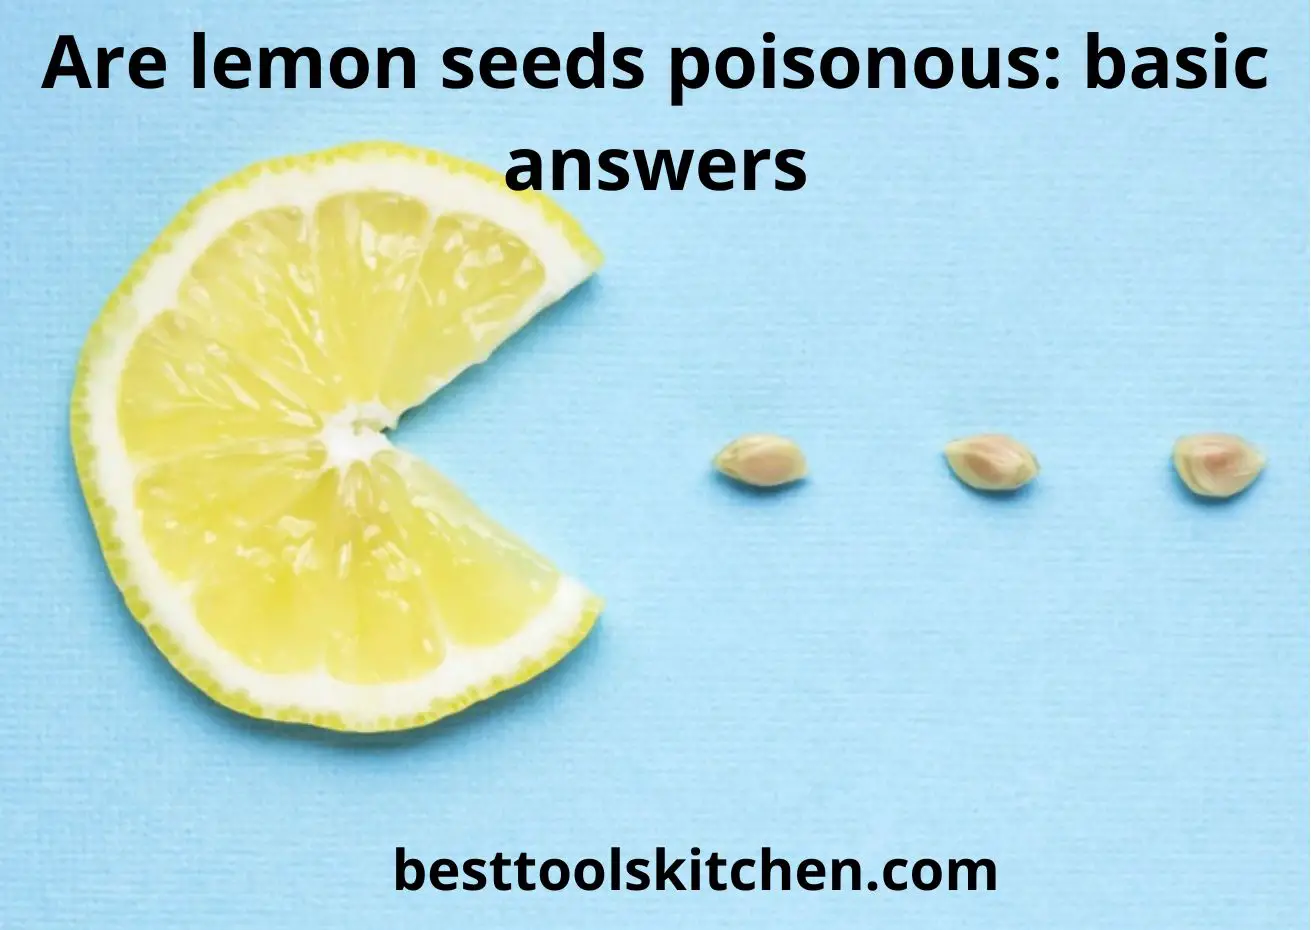 Are lemon seeds poisonous? Basic answers + recommendations